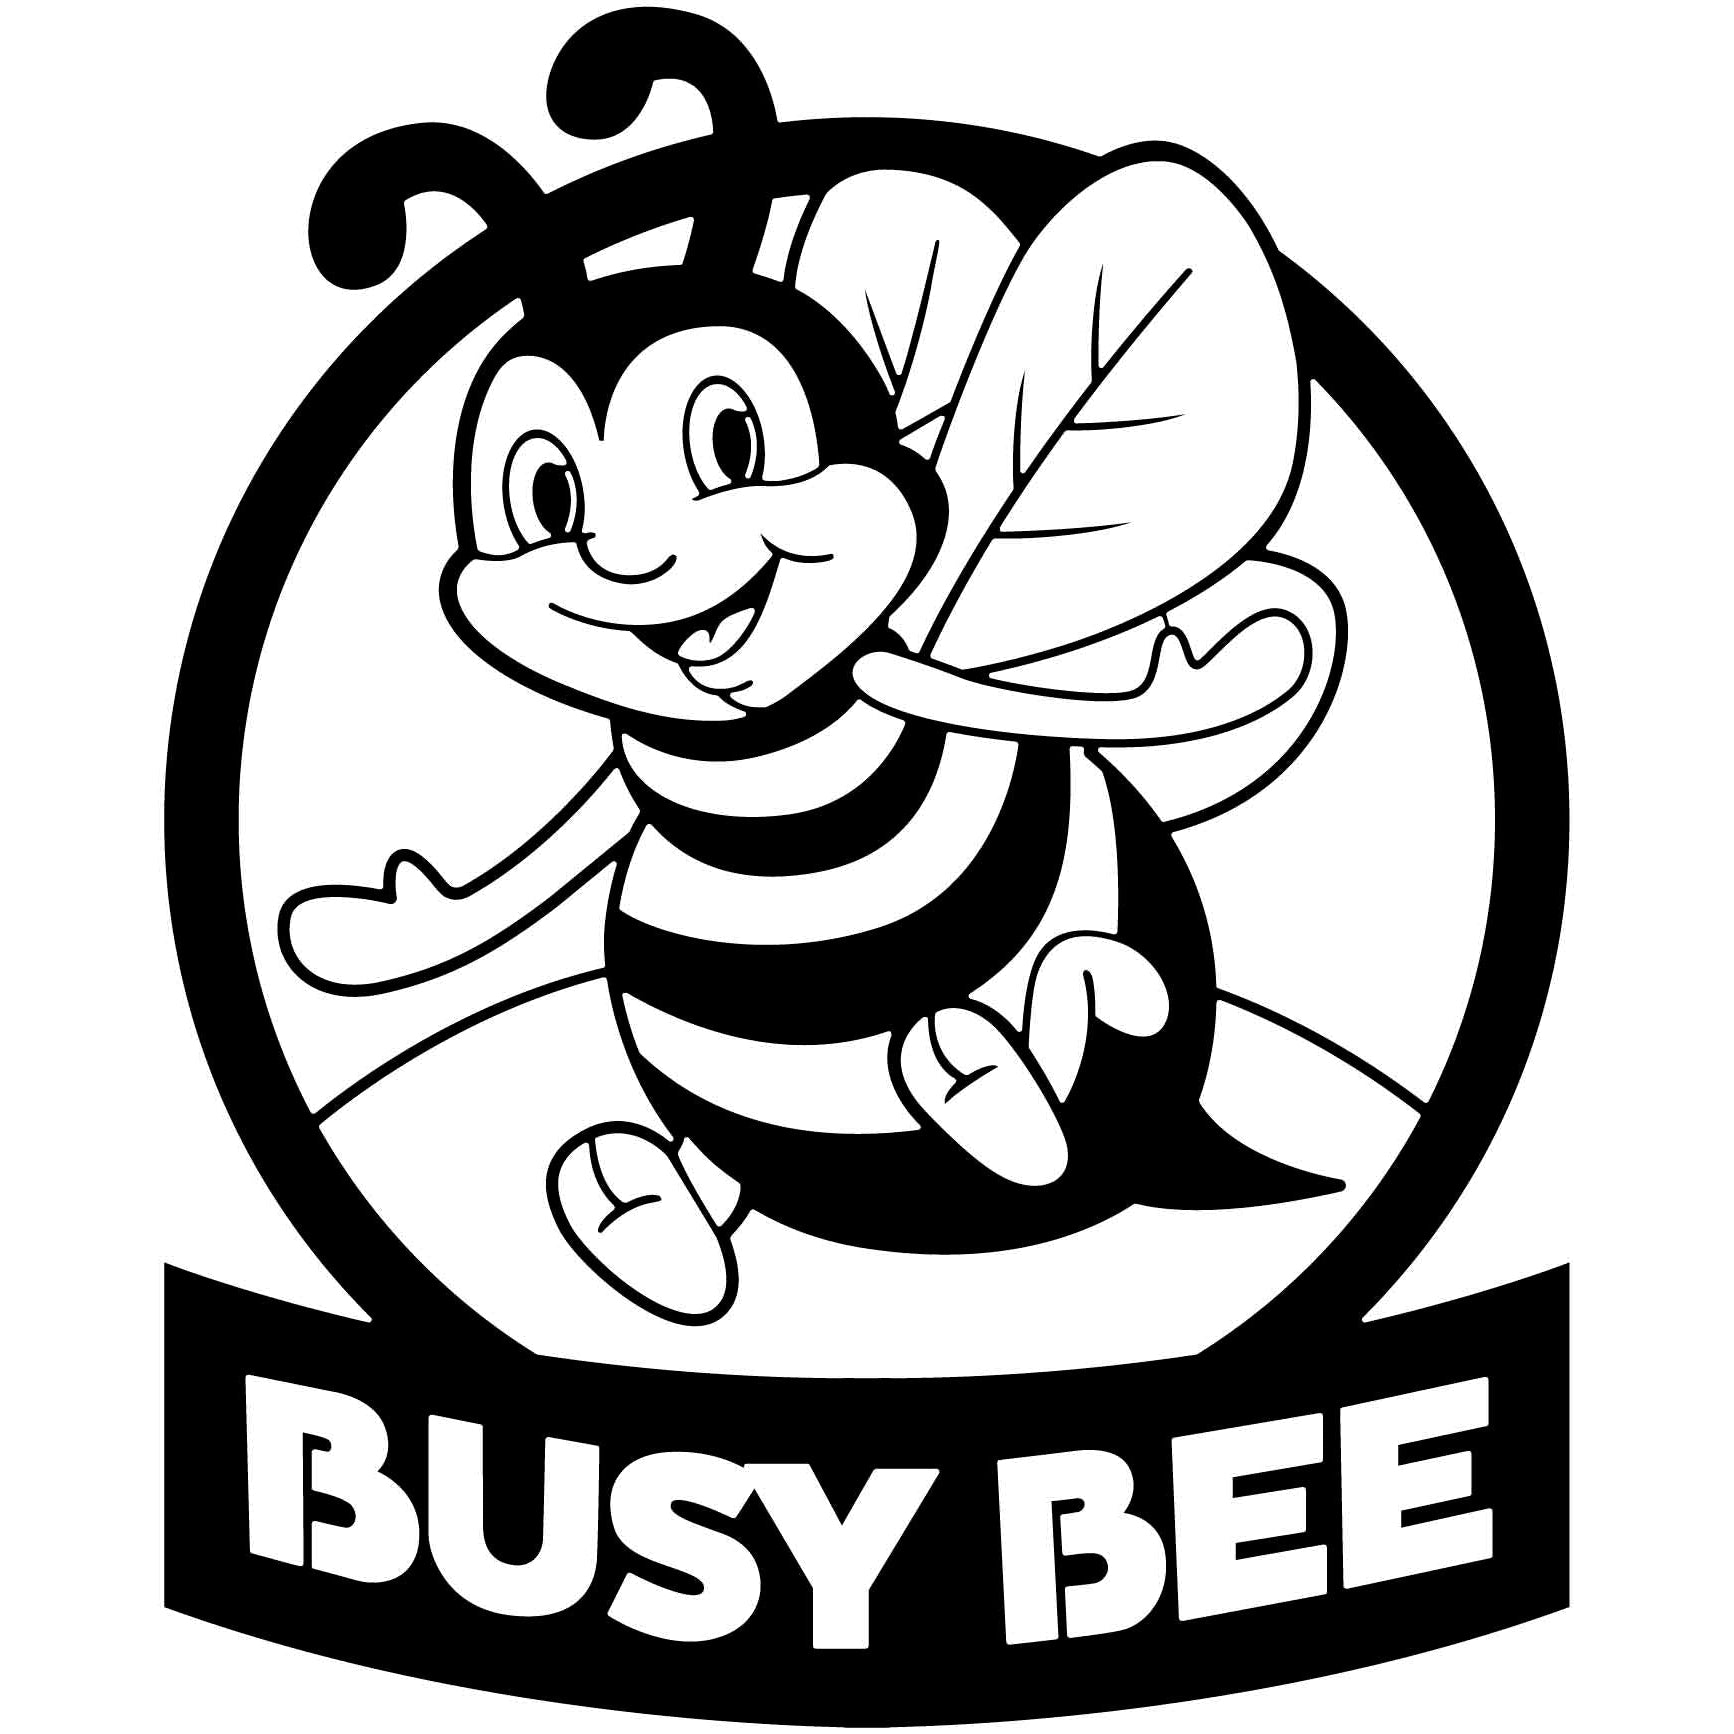 Busy Bee custom design -DXF files cut ready for cnc machines-dxfforcnc.com